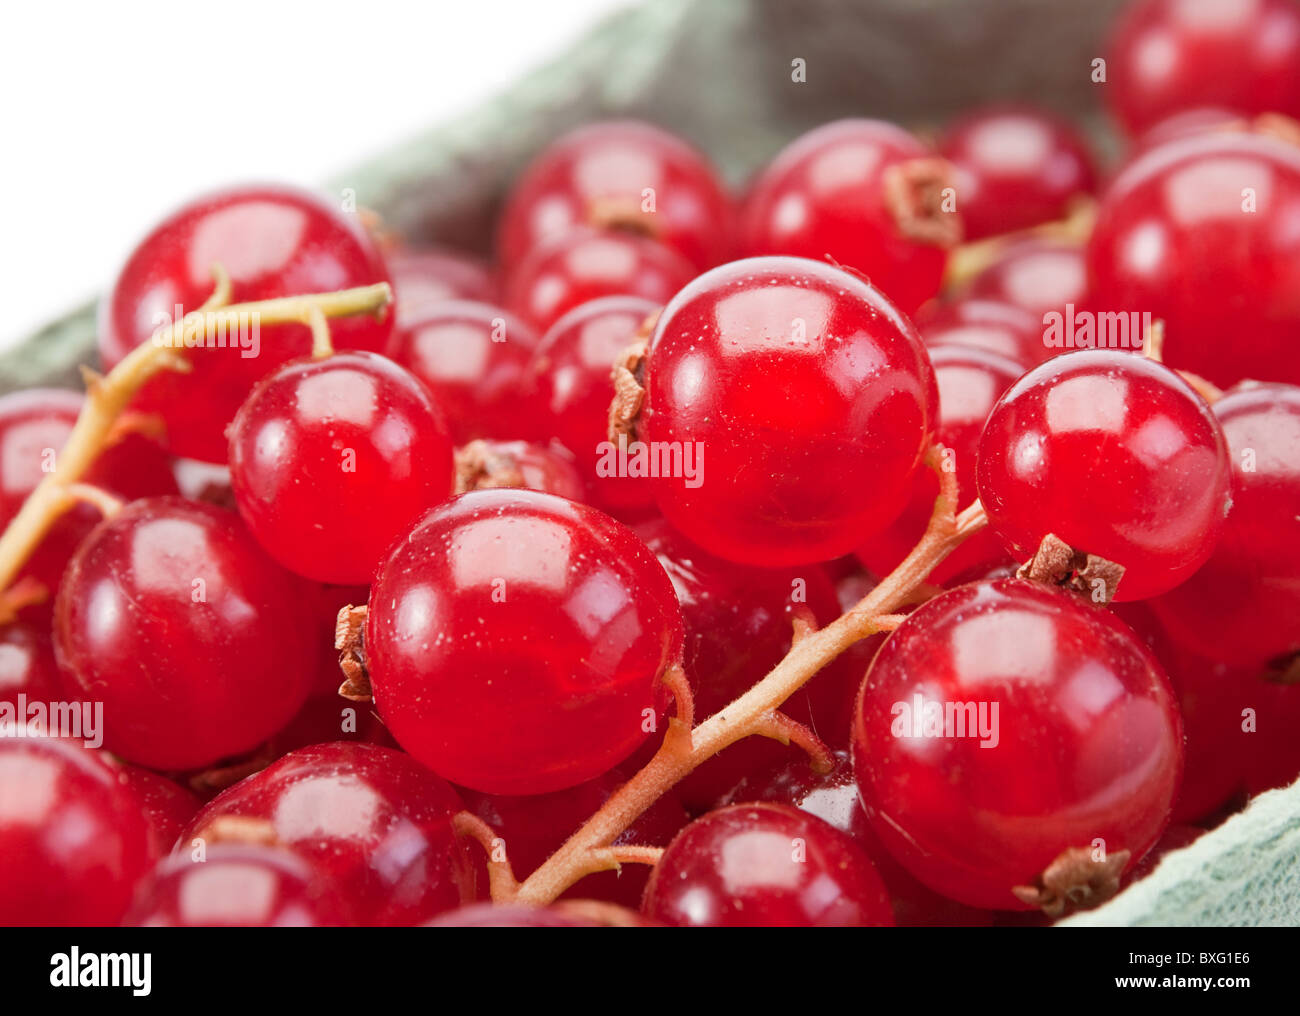 Red currant berry Stock Photo